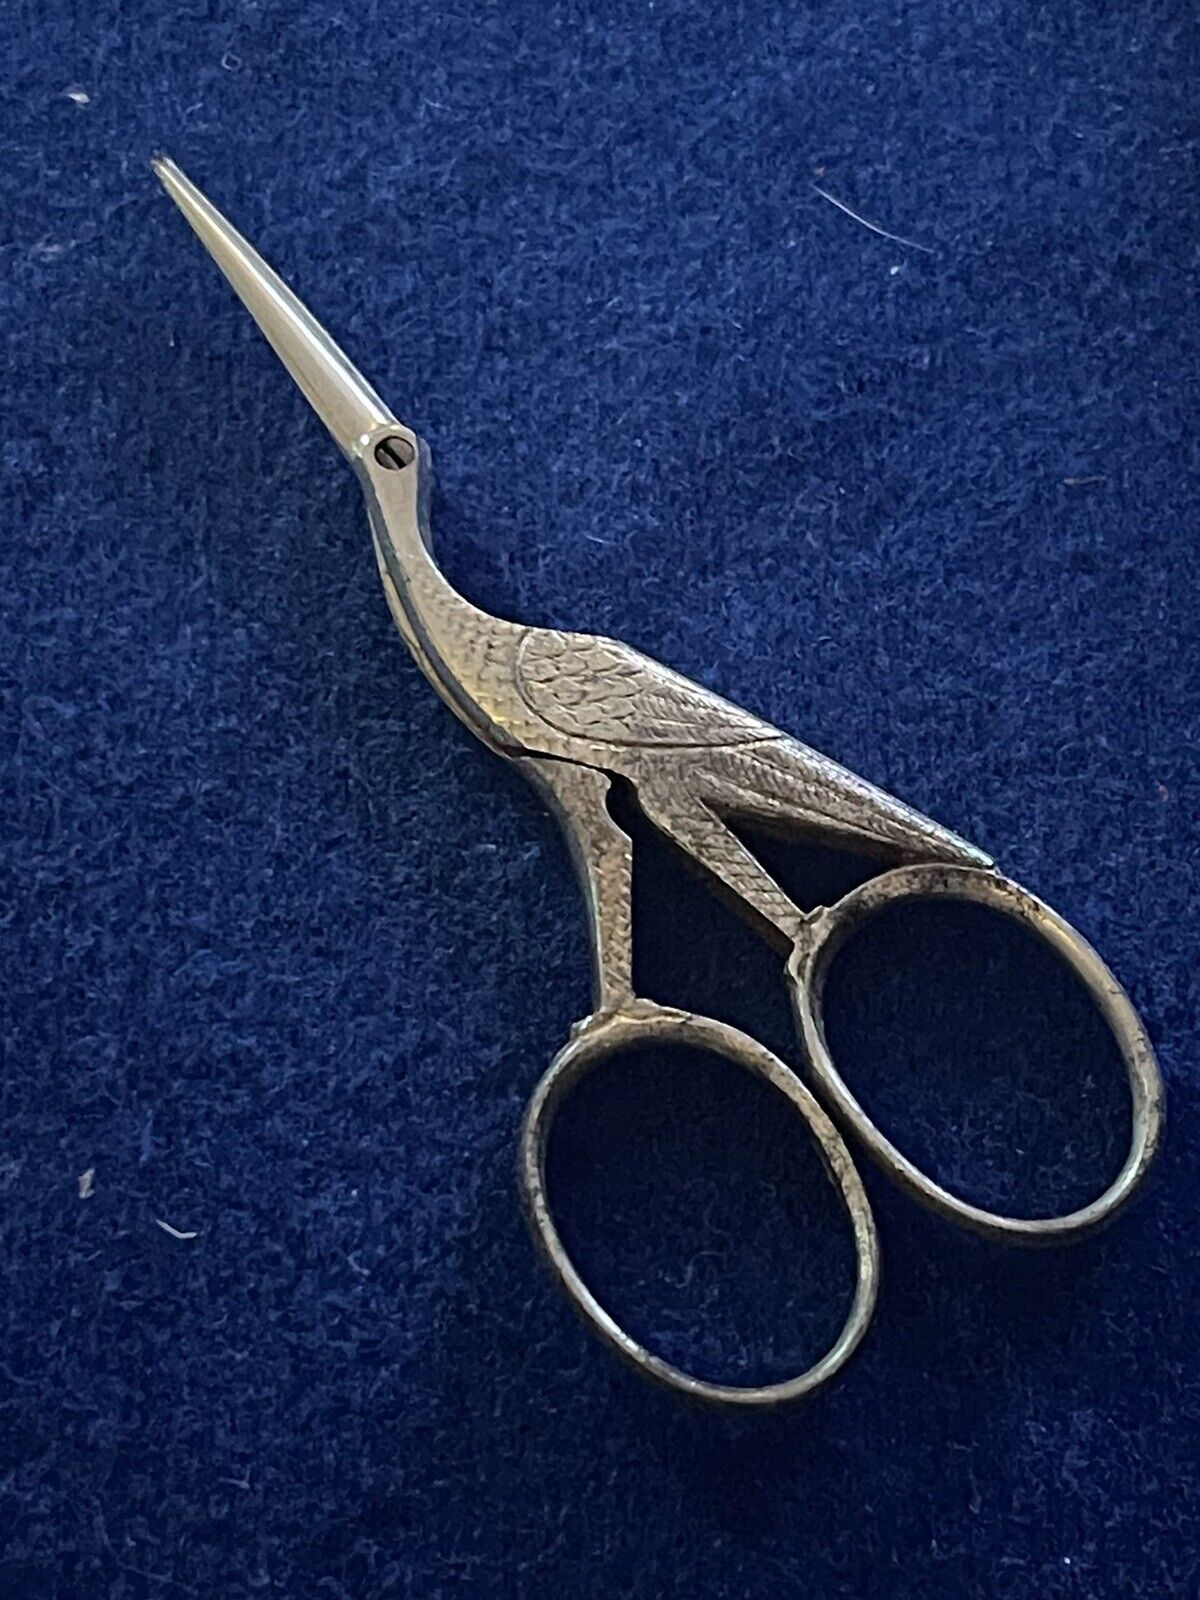 Vintage Embroidery Scissors Stork Heron Silvertone Nice Details 3 1/2 Inches